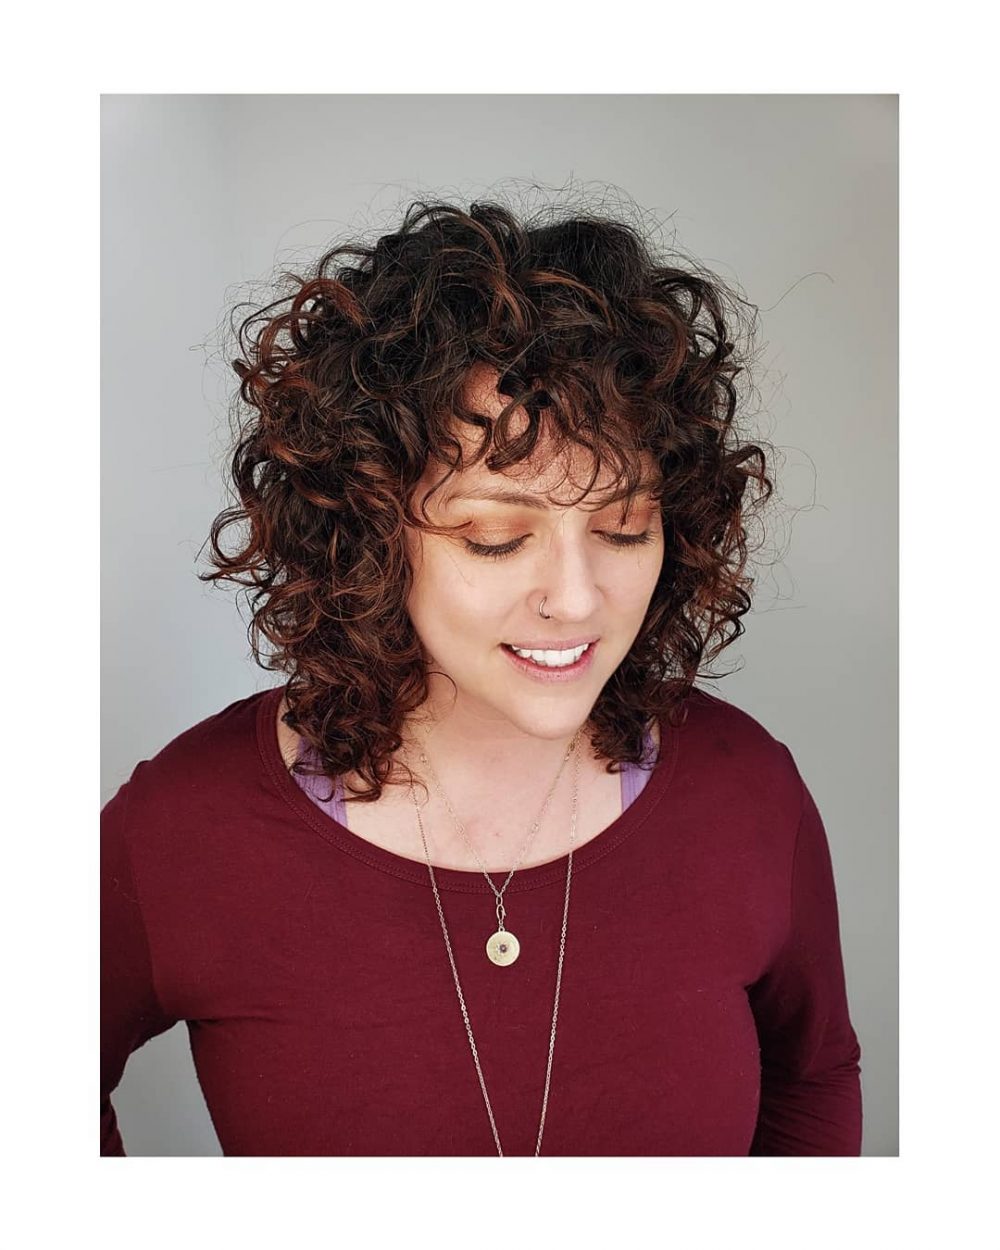 The 21 Cutest Examples of Naturally Curly Hair with Bangs